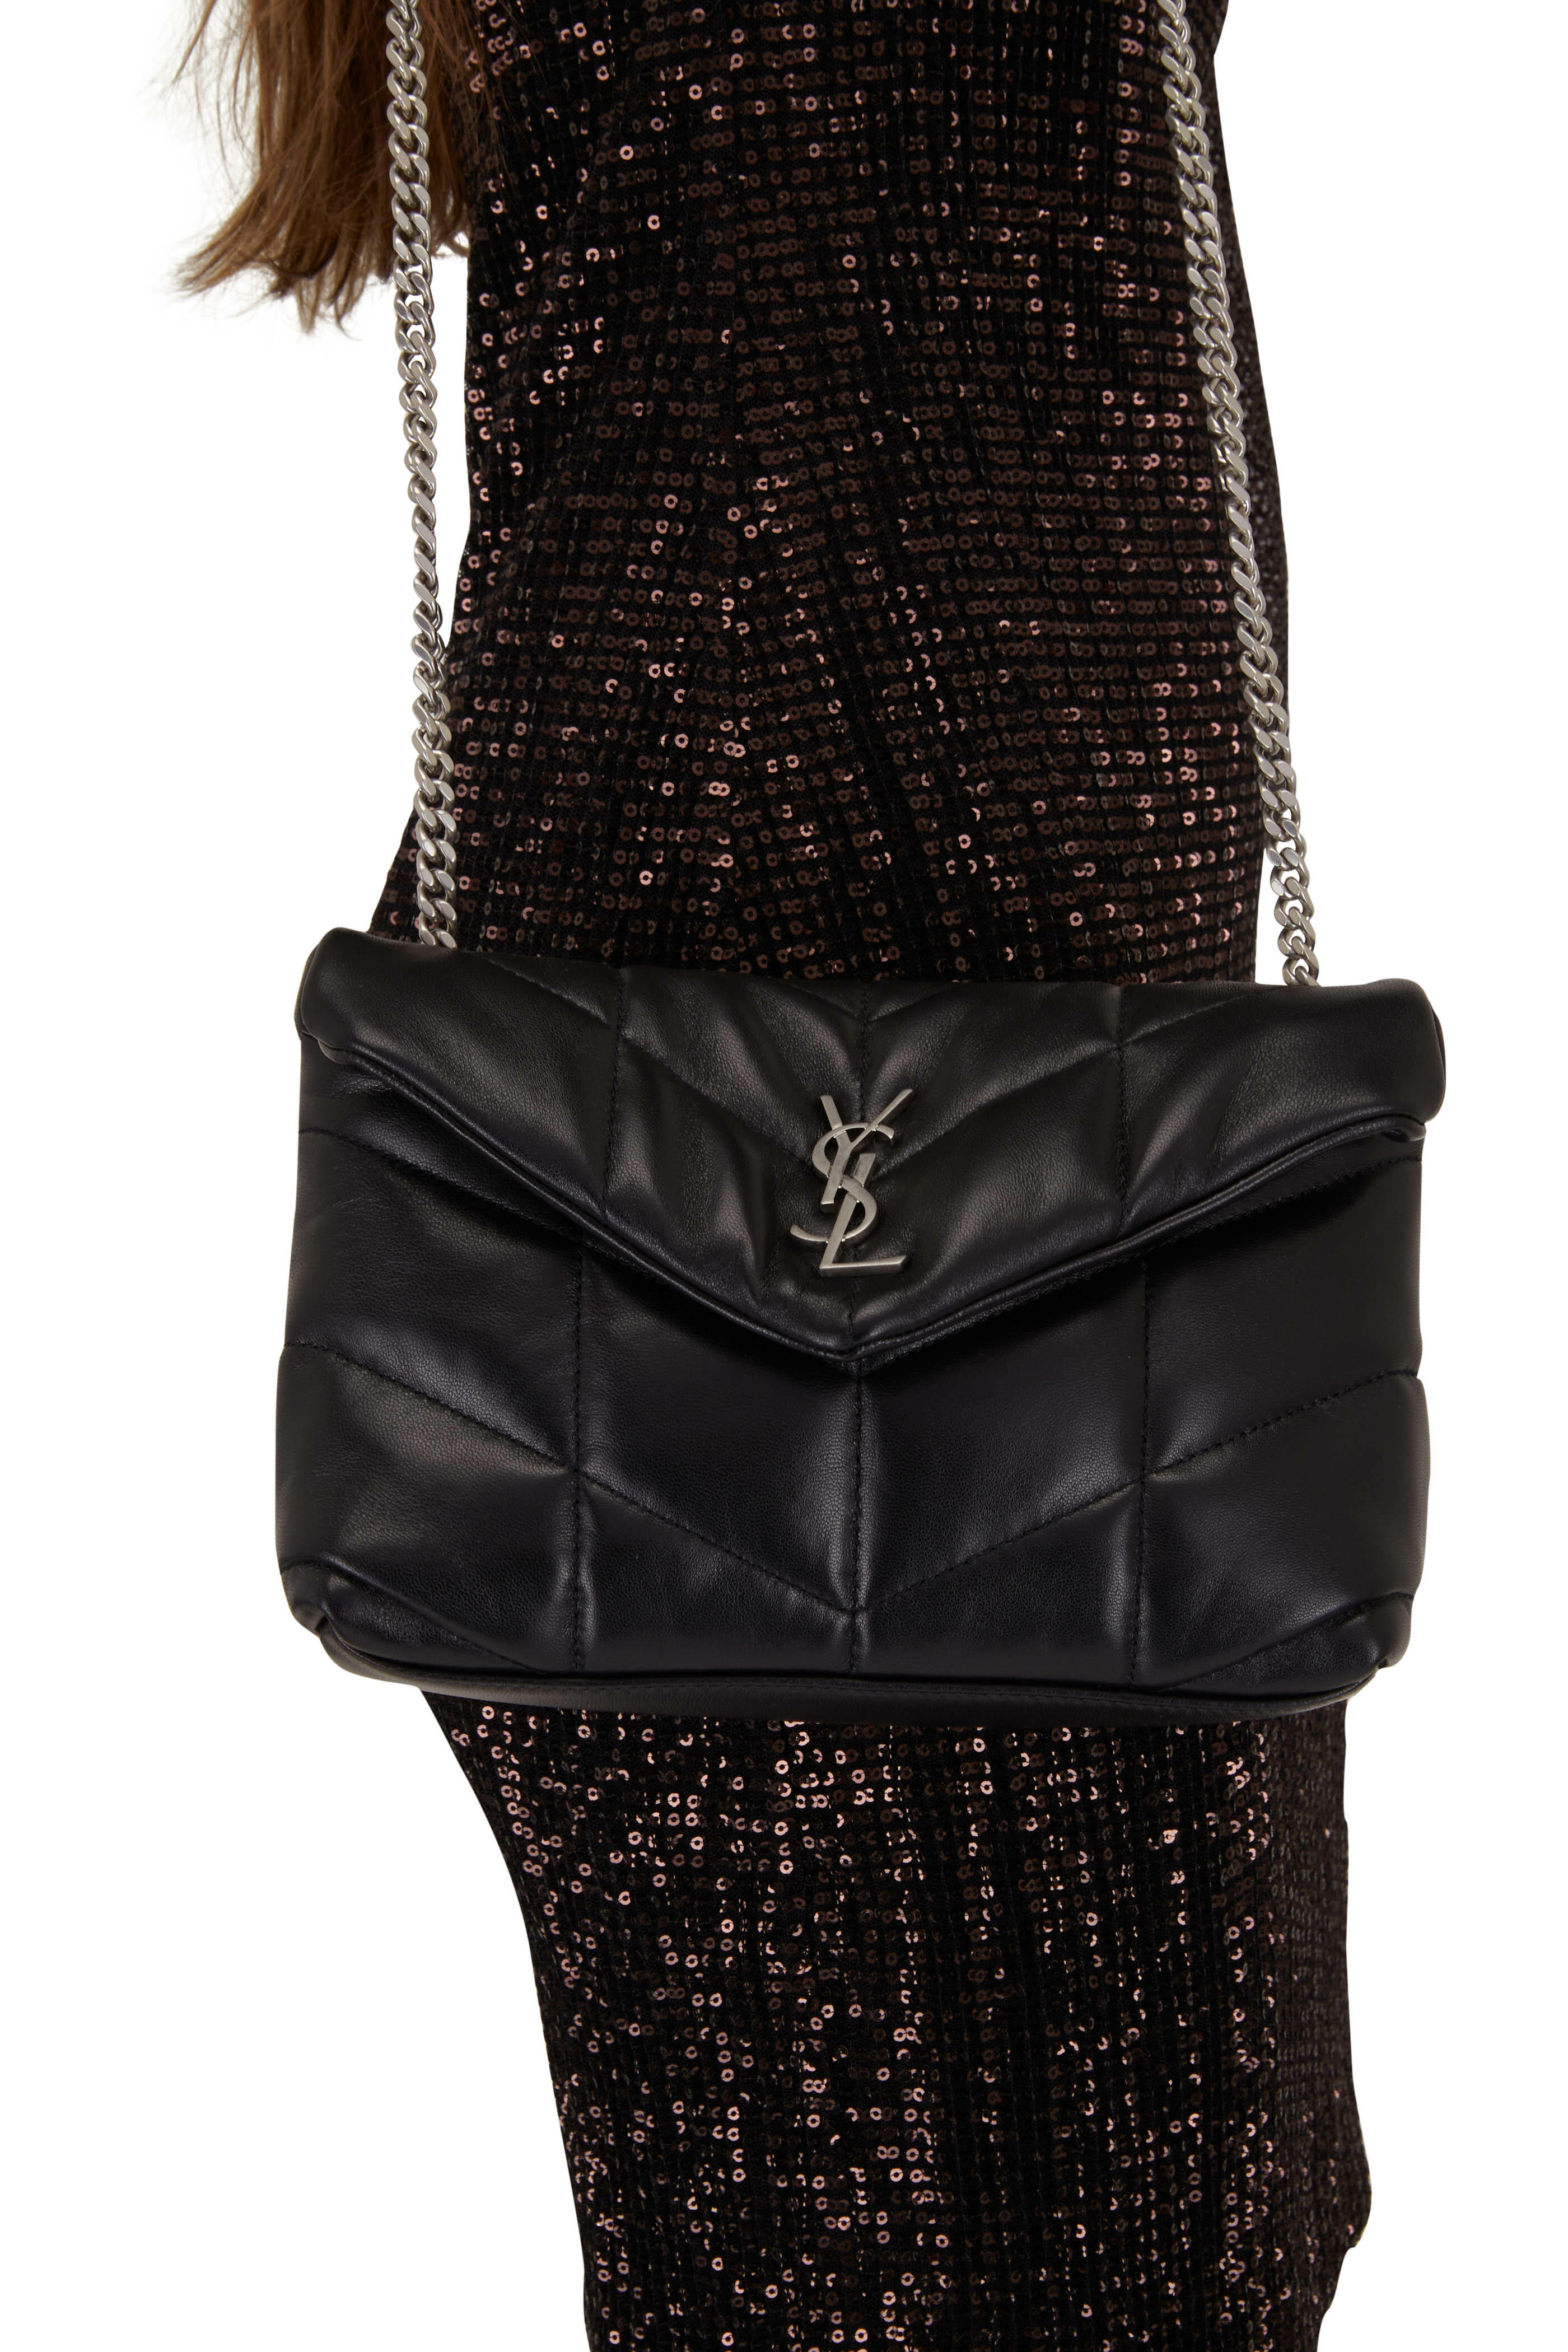 Saint Laurent Toy Loulou Puffer Quilted Leather Crossbody Bag Black/Gold